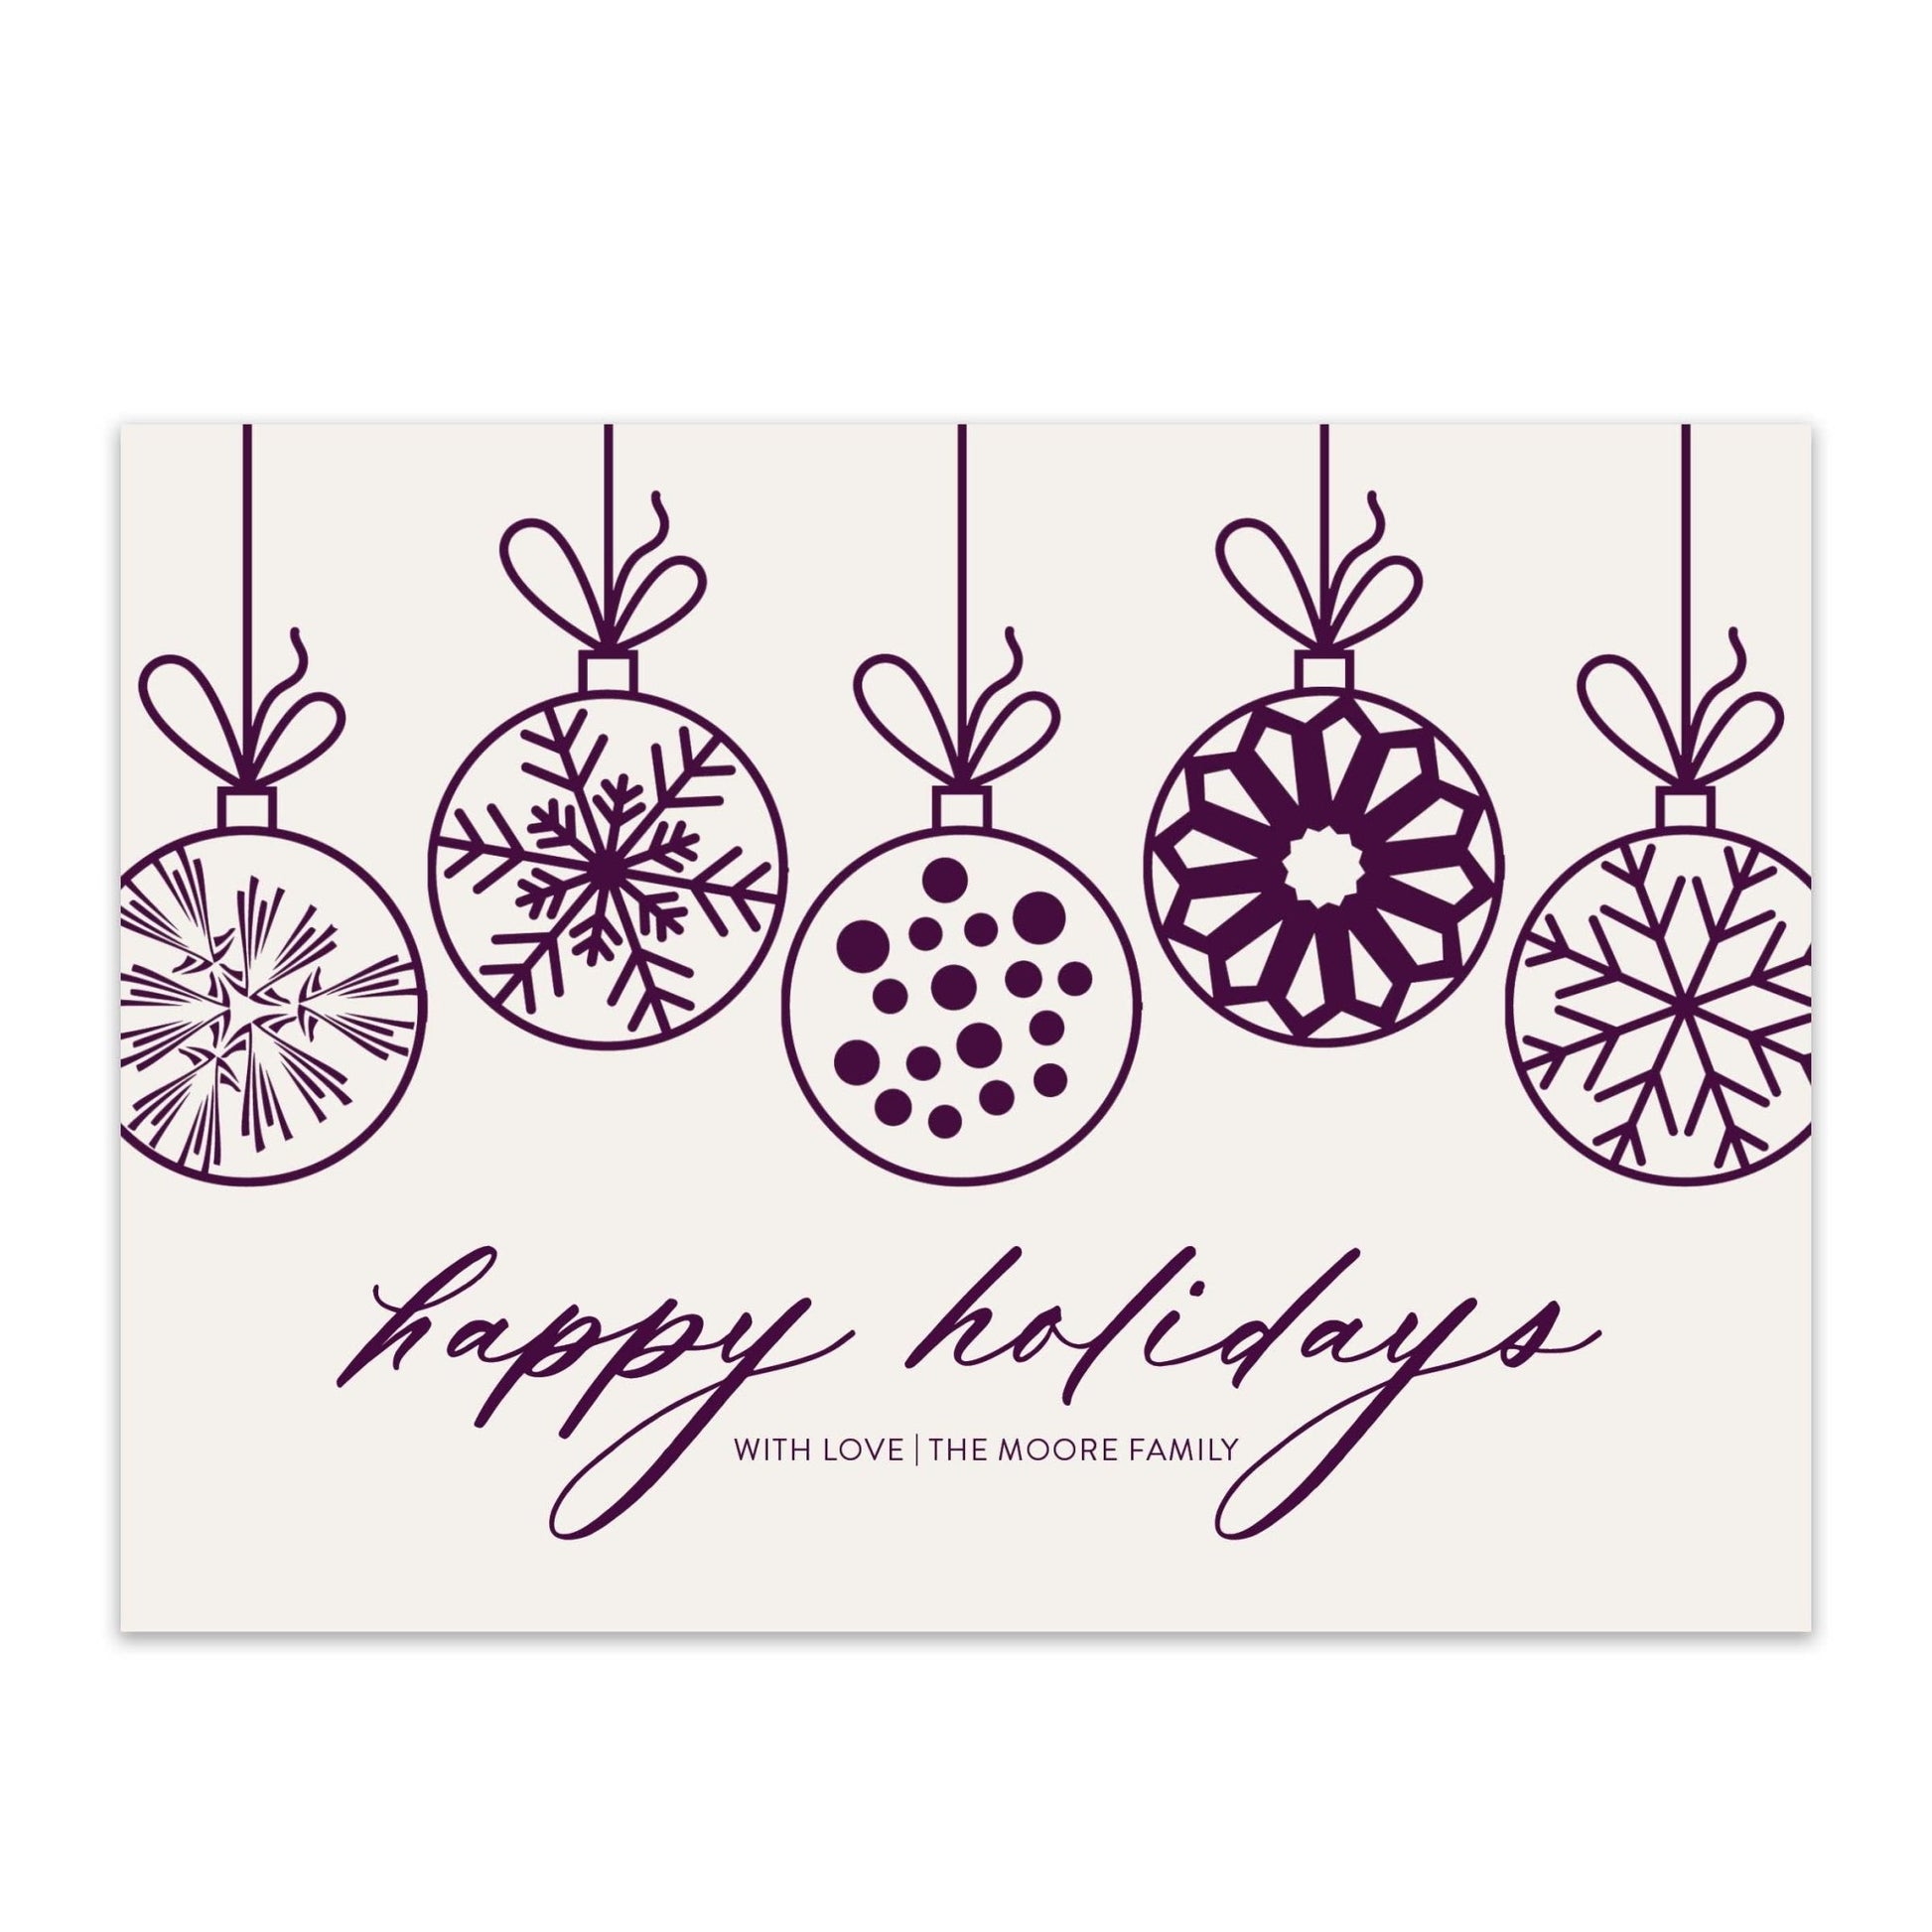 Hanging Ornaments Holiday Cards - Blú Rose